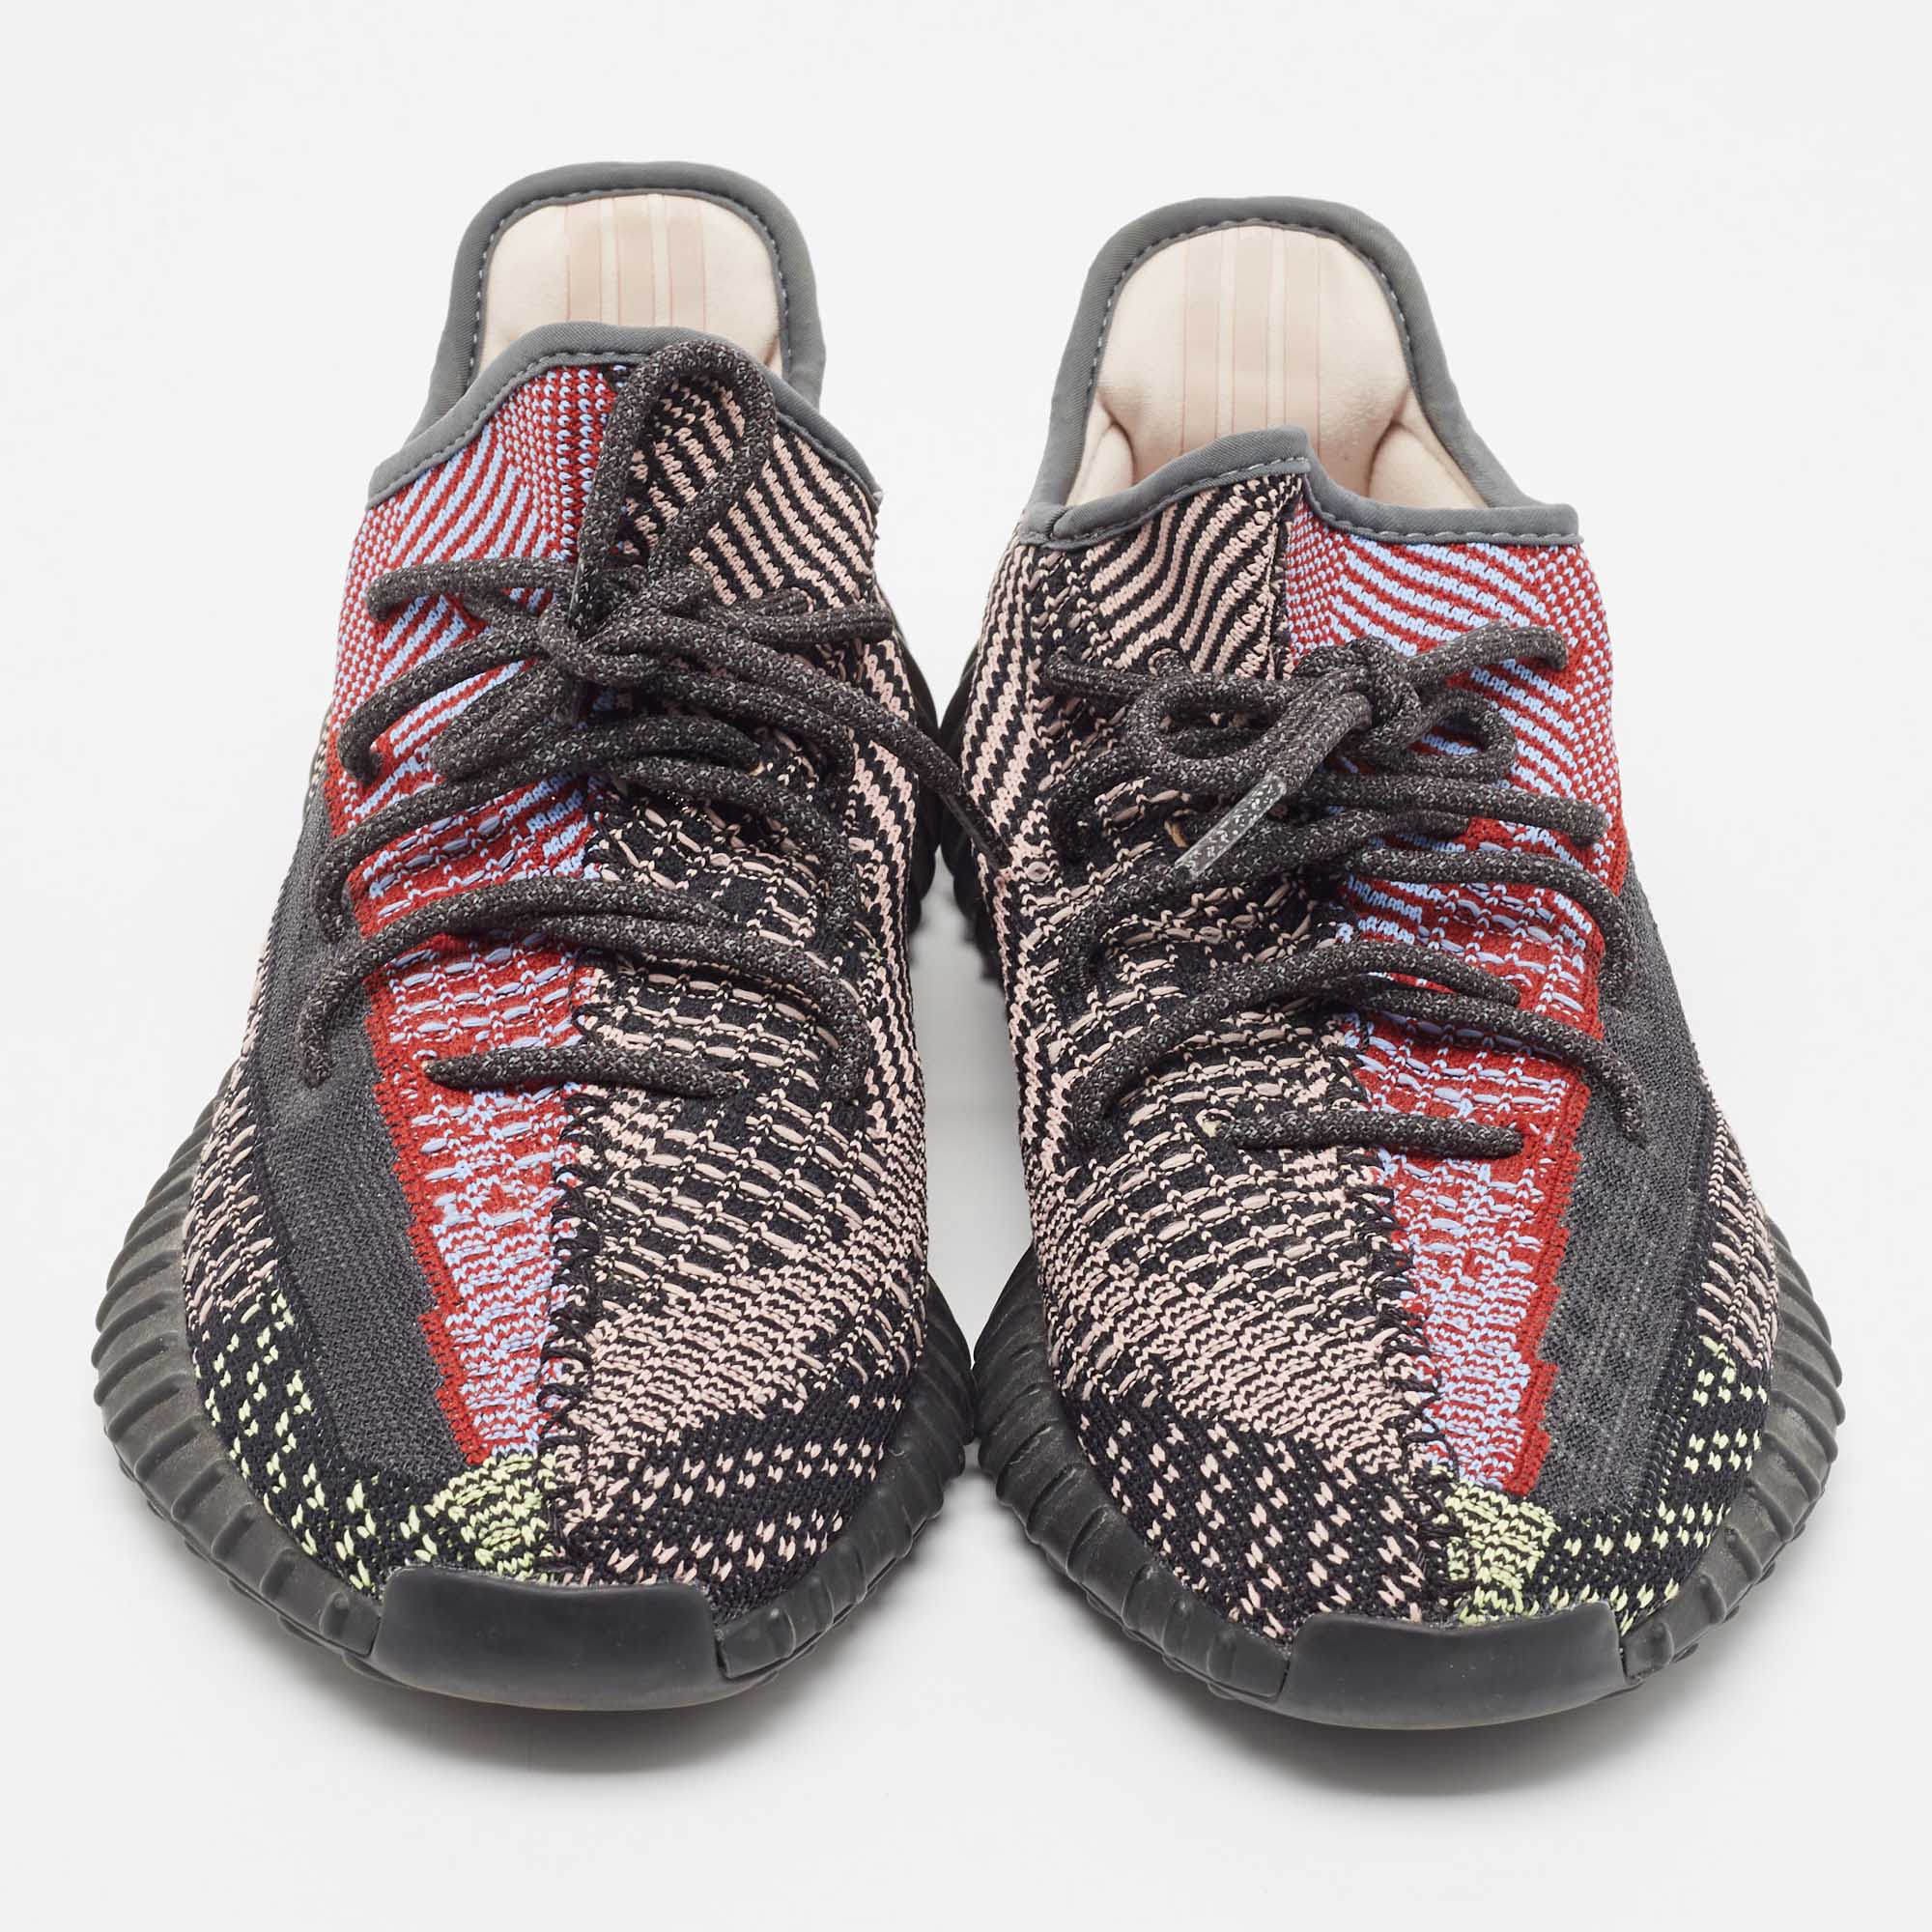 Adidas X Yeezy Multicolor Knit Fabric Boost-350-v2-yecheil Sneakers Size 43 1/3